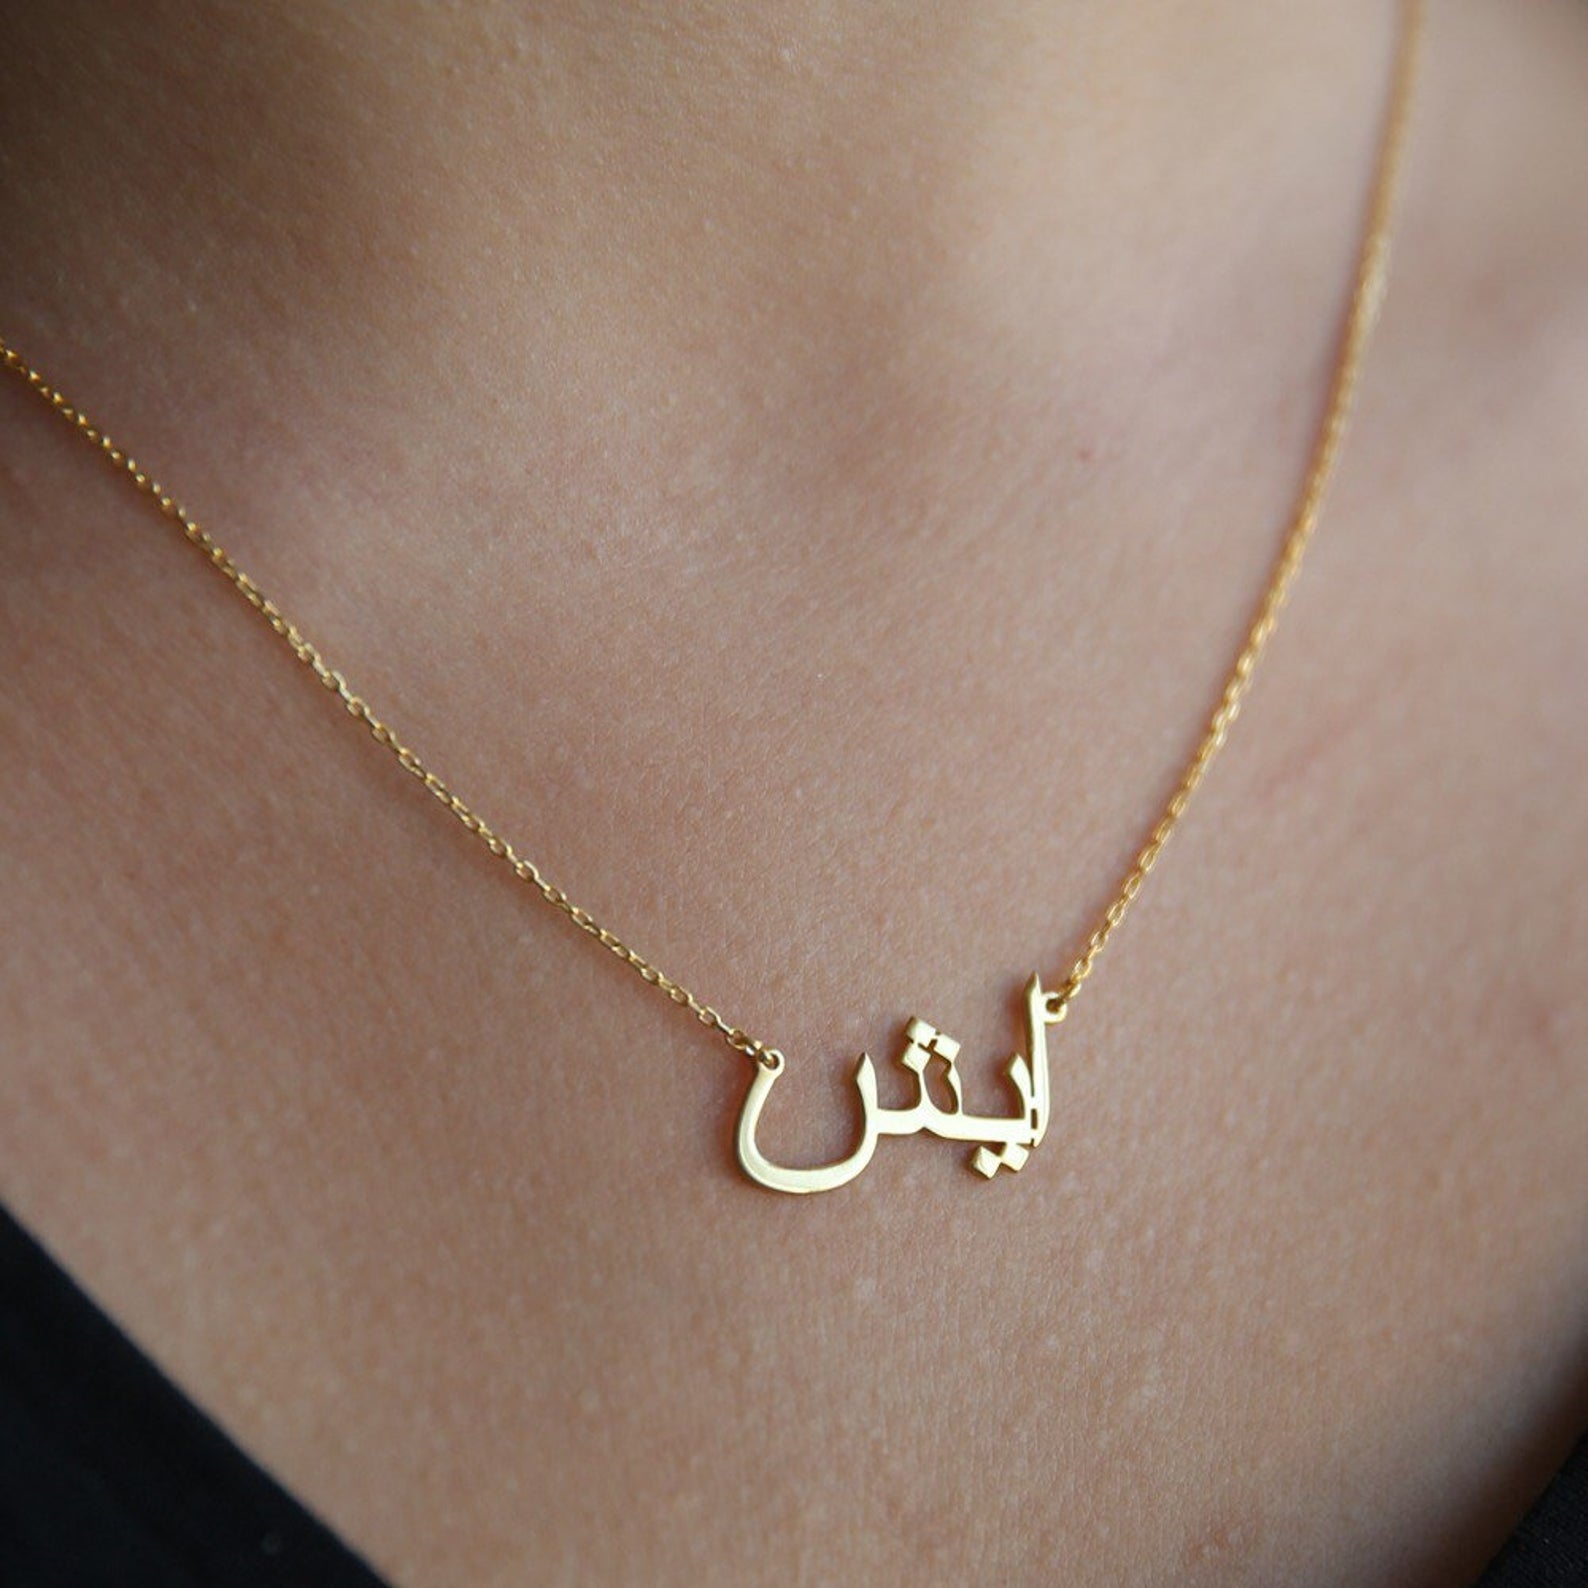 Personalized Urdu Name Necklace